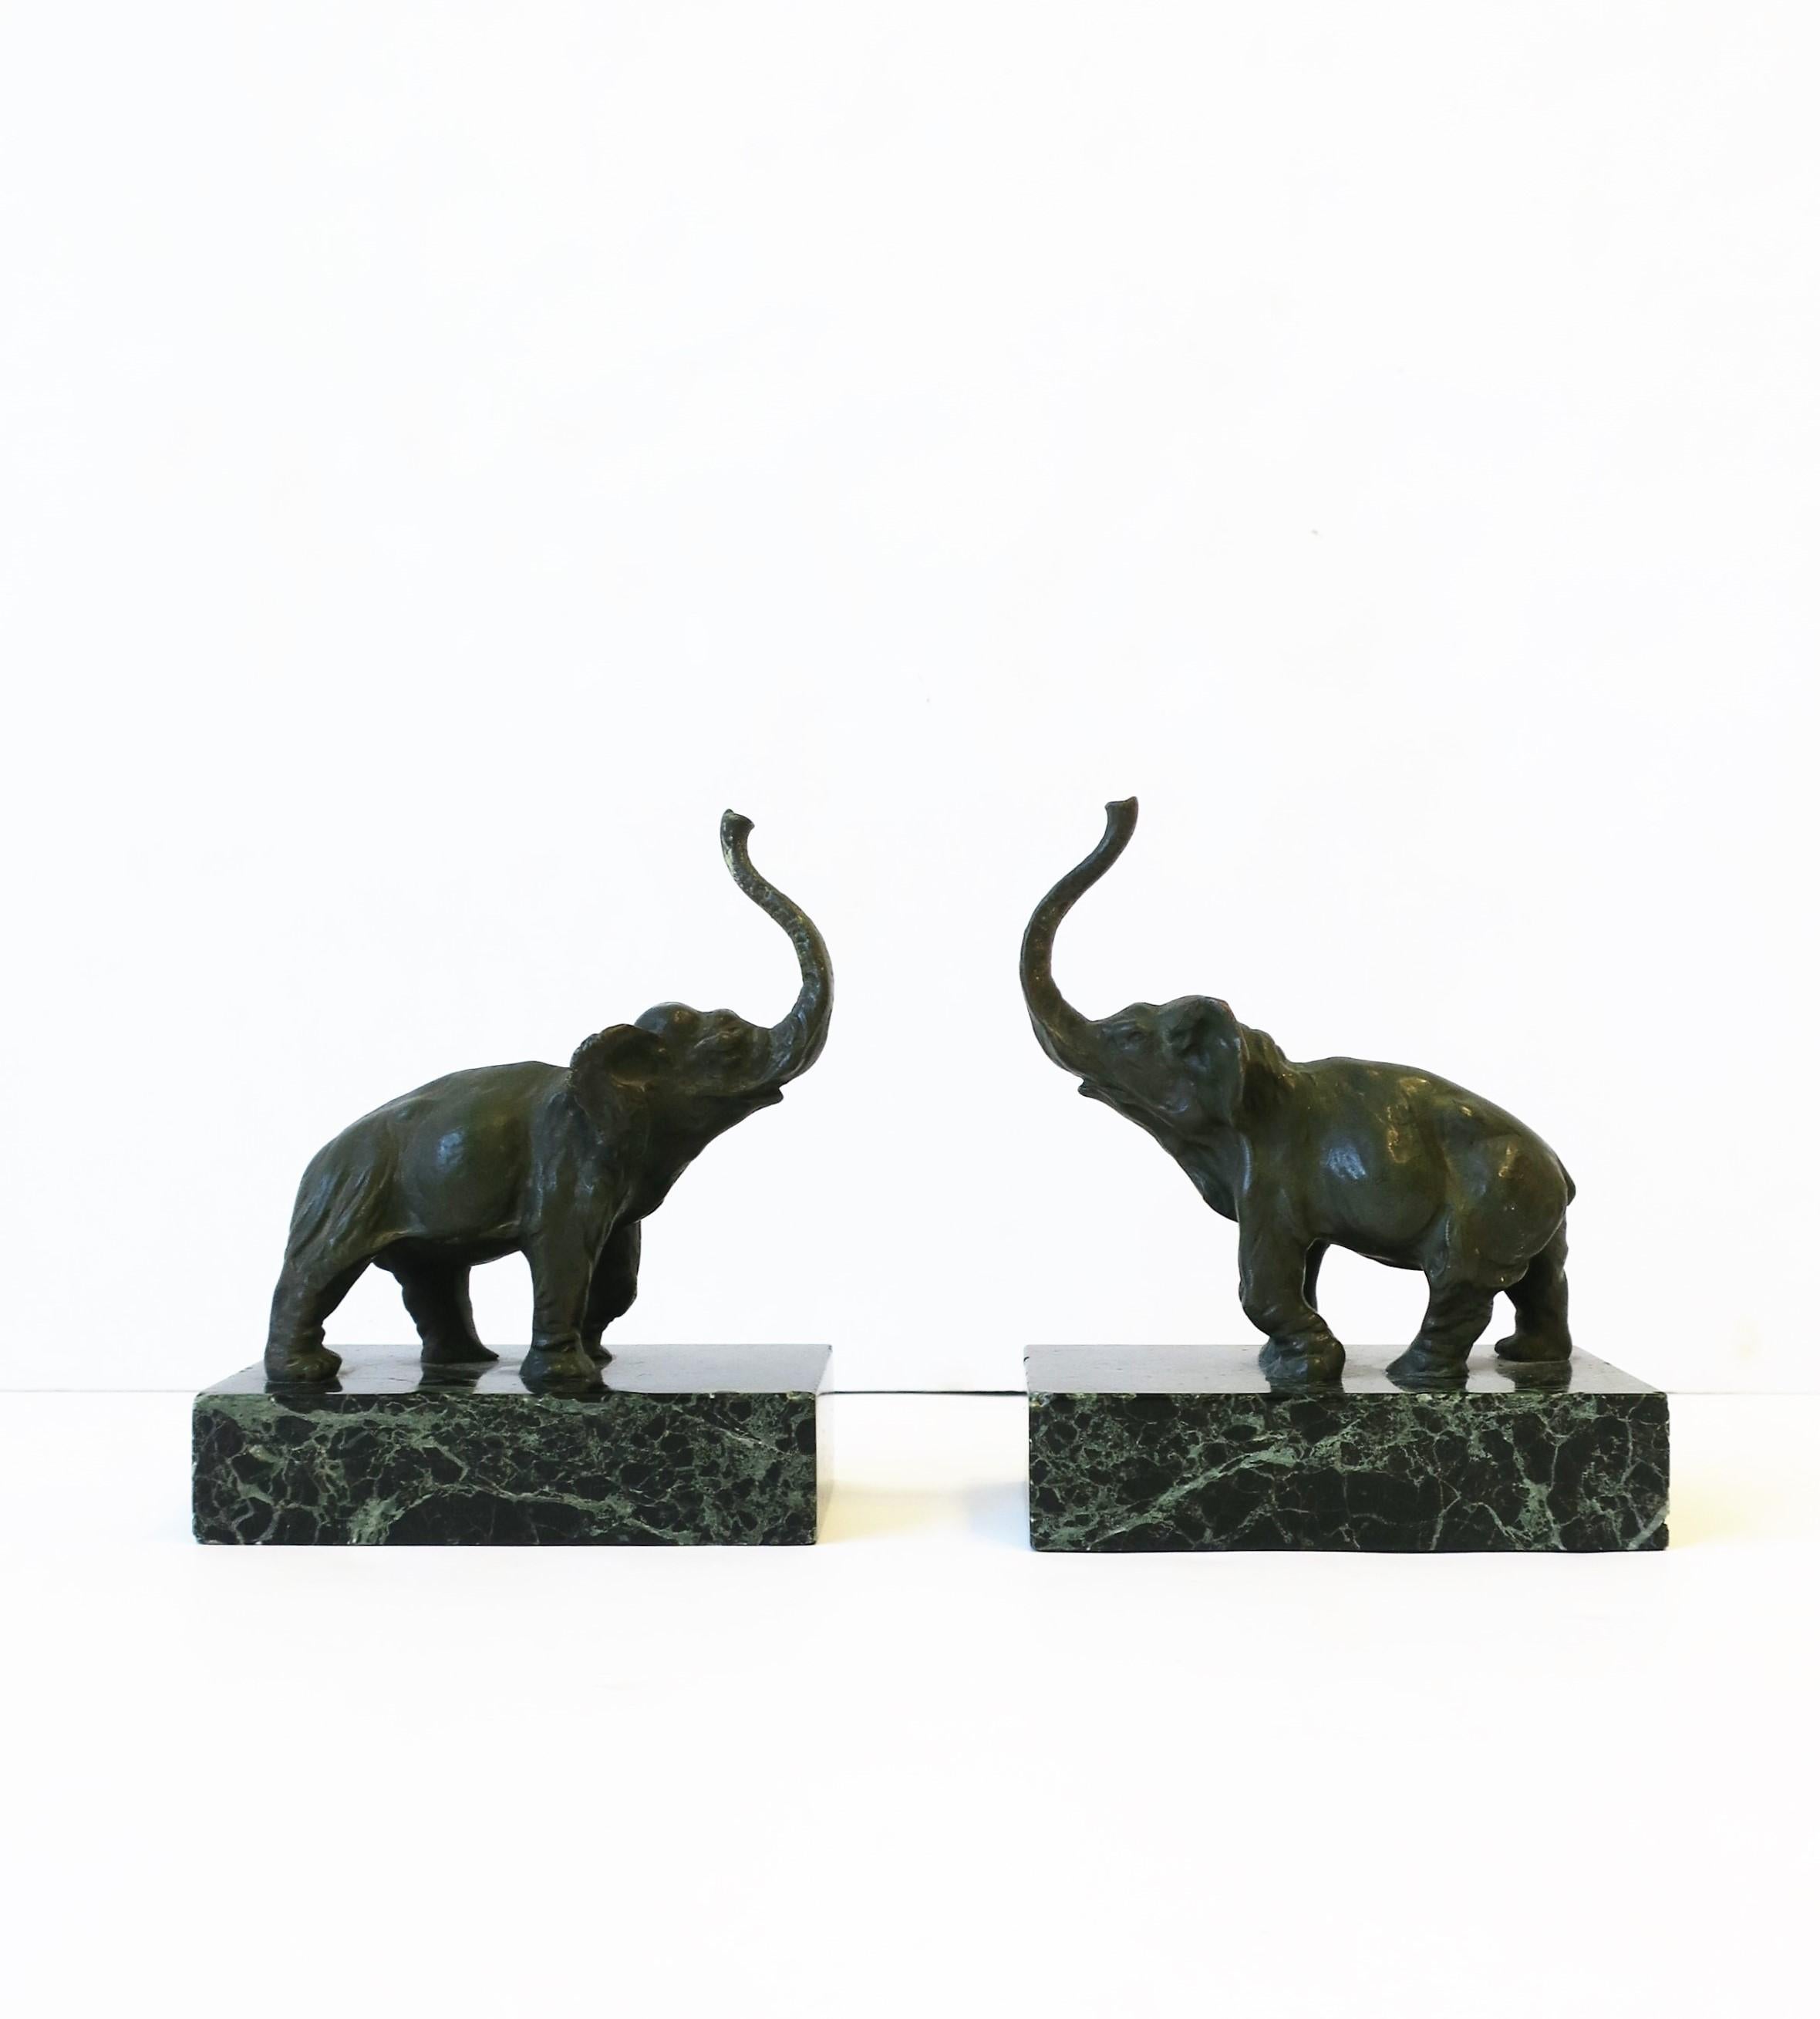 A substantial pair of bronze verdigris elephant bookends or decorative objects, circa mid to late-20th century, 1970s. Substantial bronze verdigris elephant's atop dark green marble bases. Dimensions: 3.07